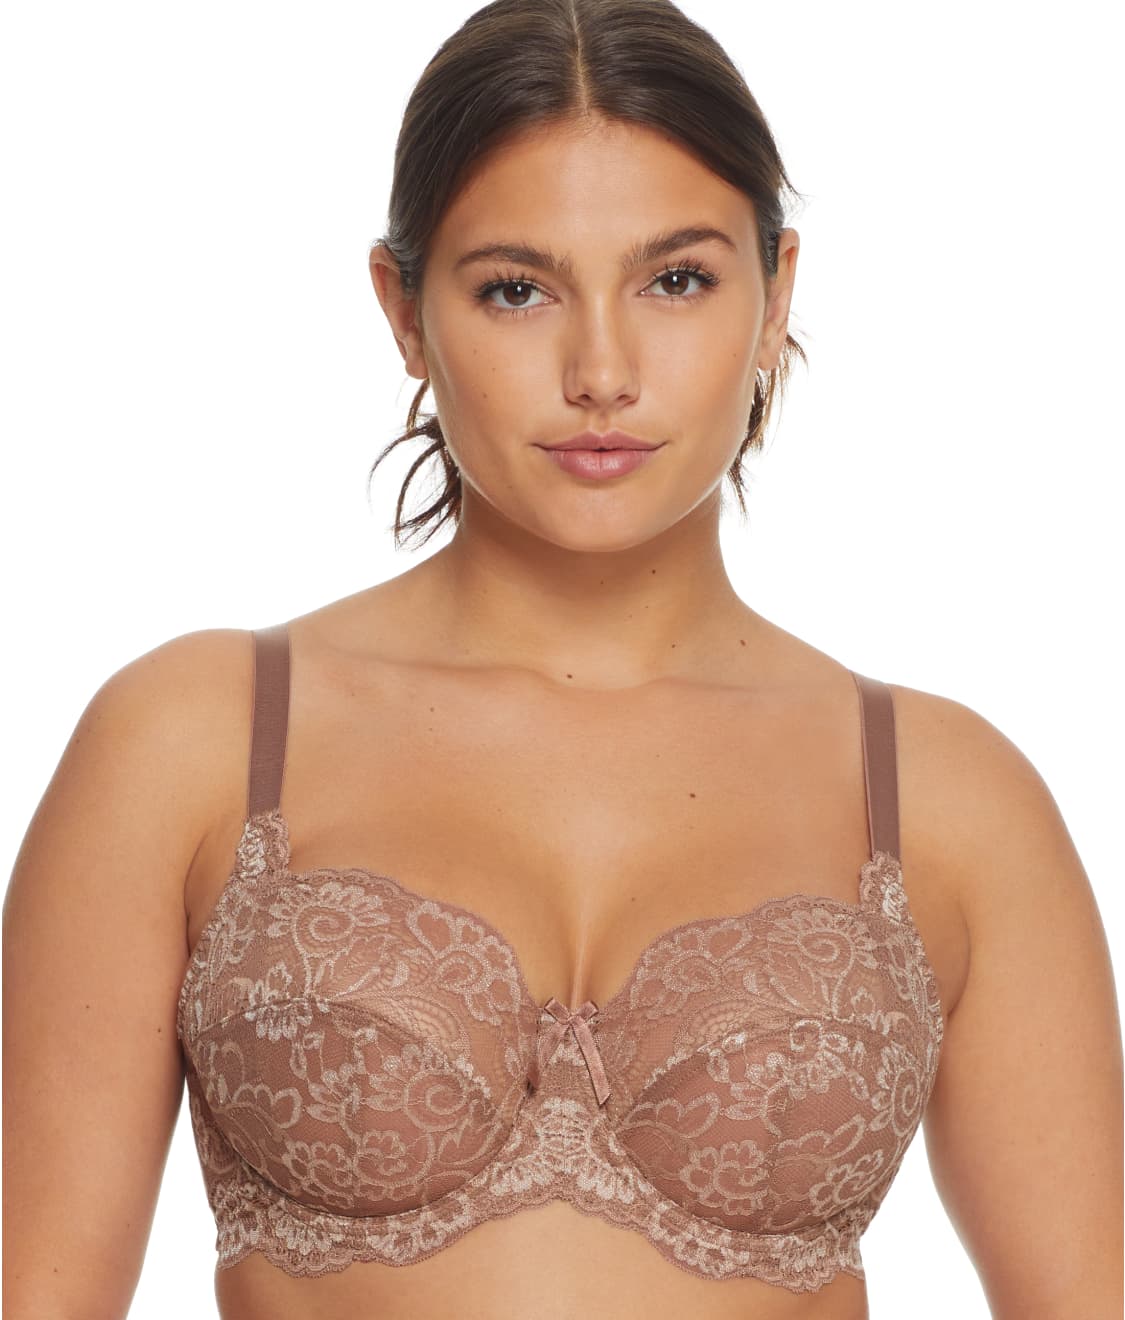 Panache Andorra Full Cup Bra 5675 Underwired Non-Padded Lace Womens Lingerie